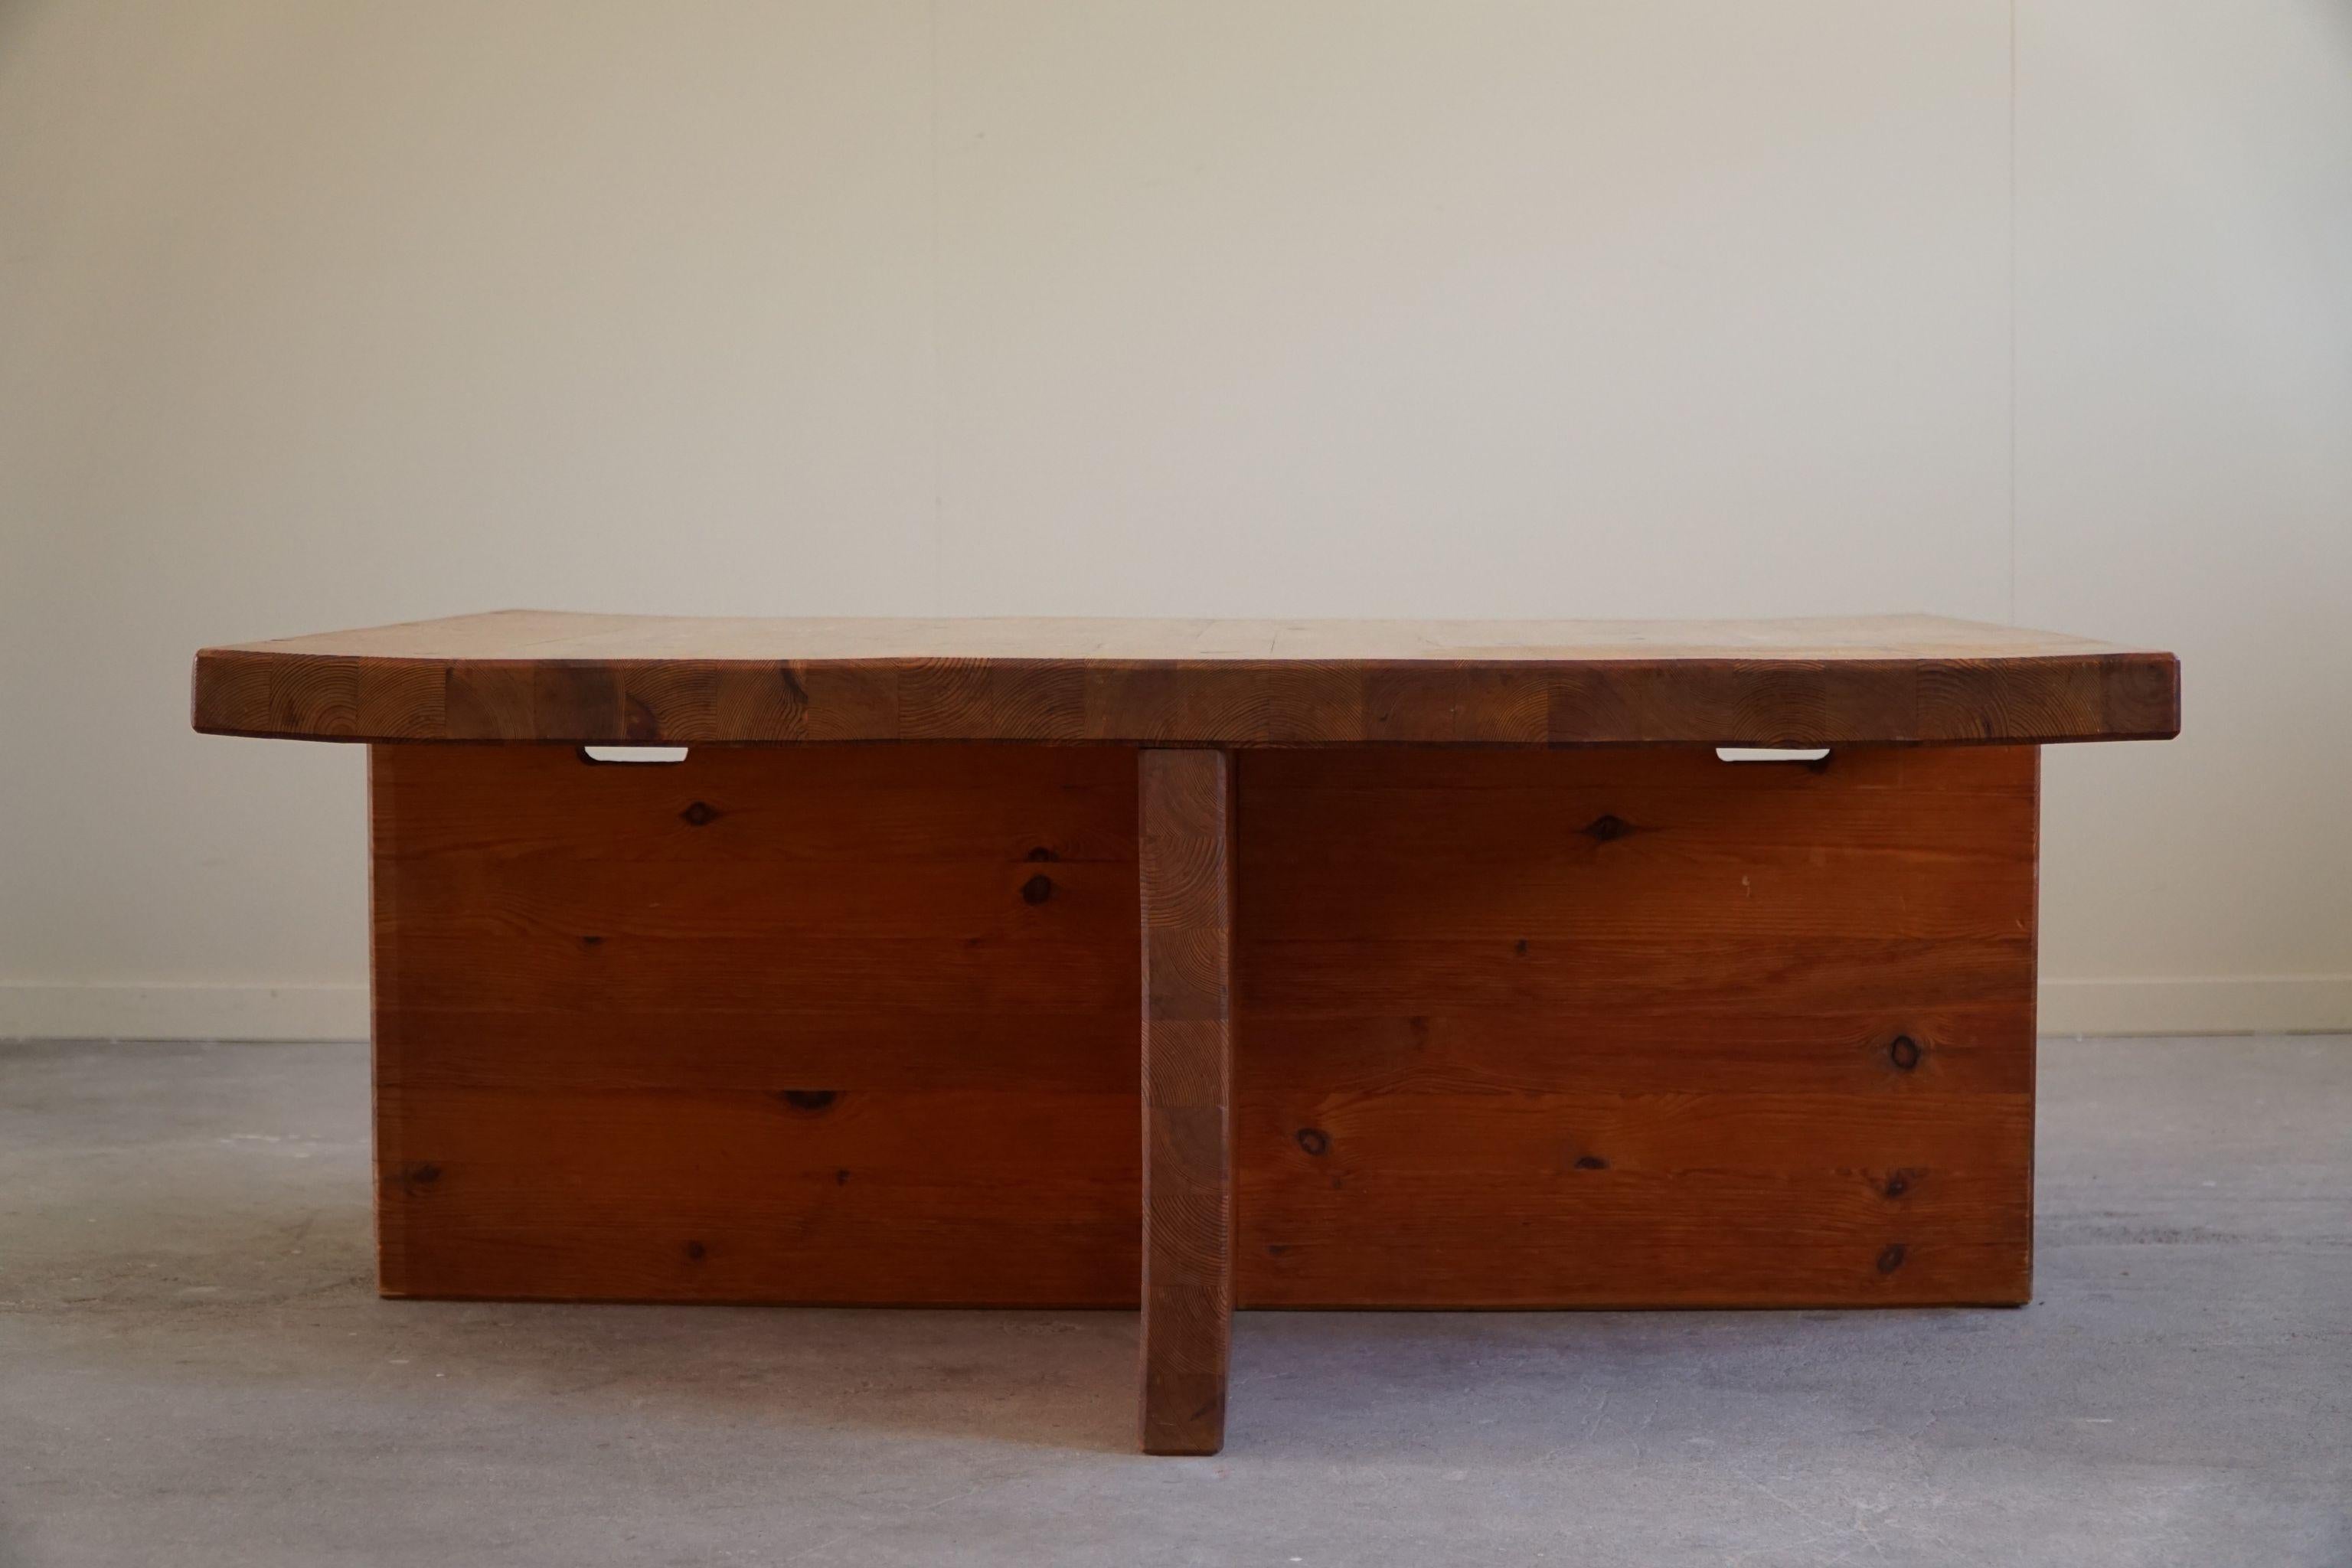 Swedish Modern Solid Pine Coffee Table by Sven Larsson, Brutalist, 1970s For Sale 4